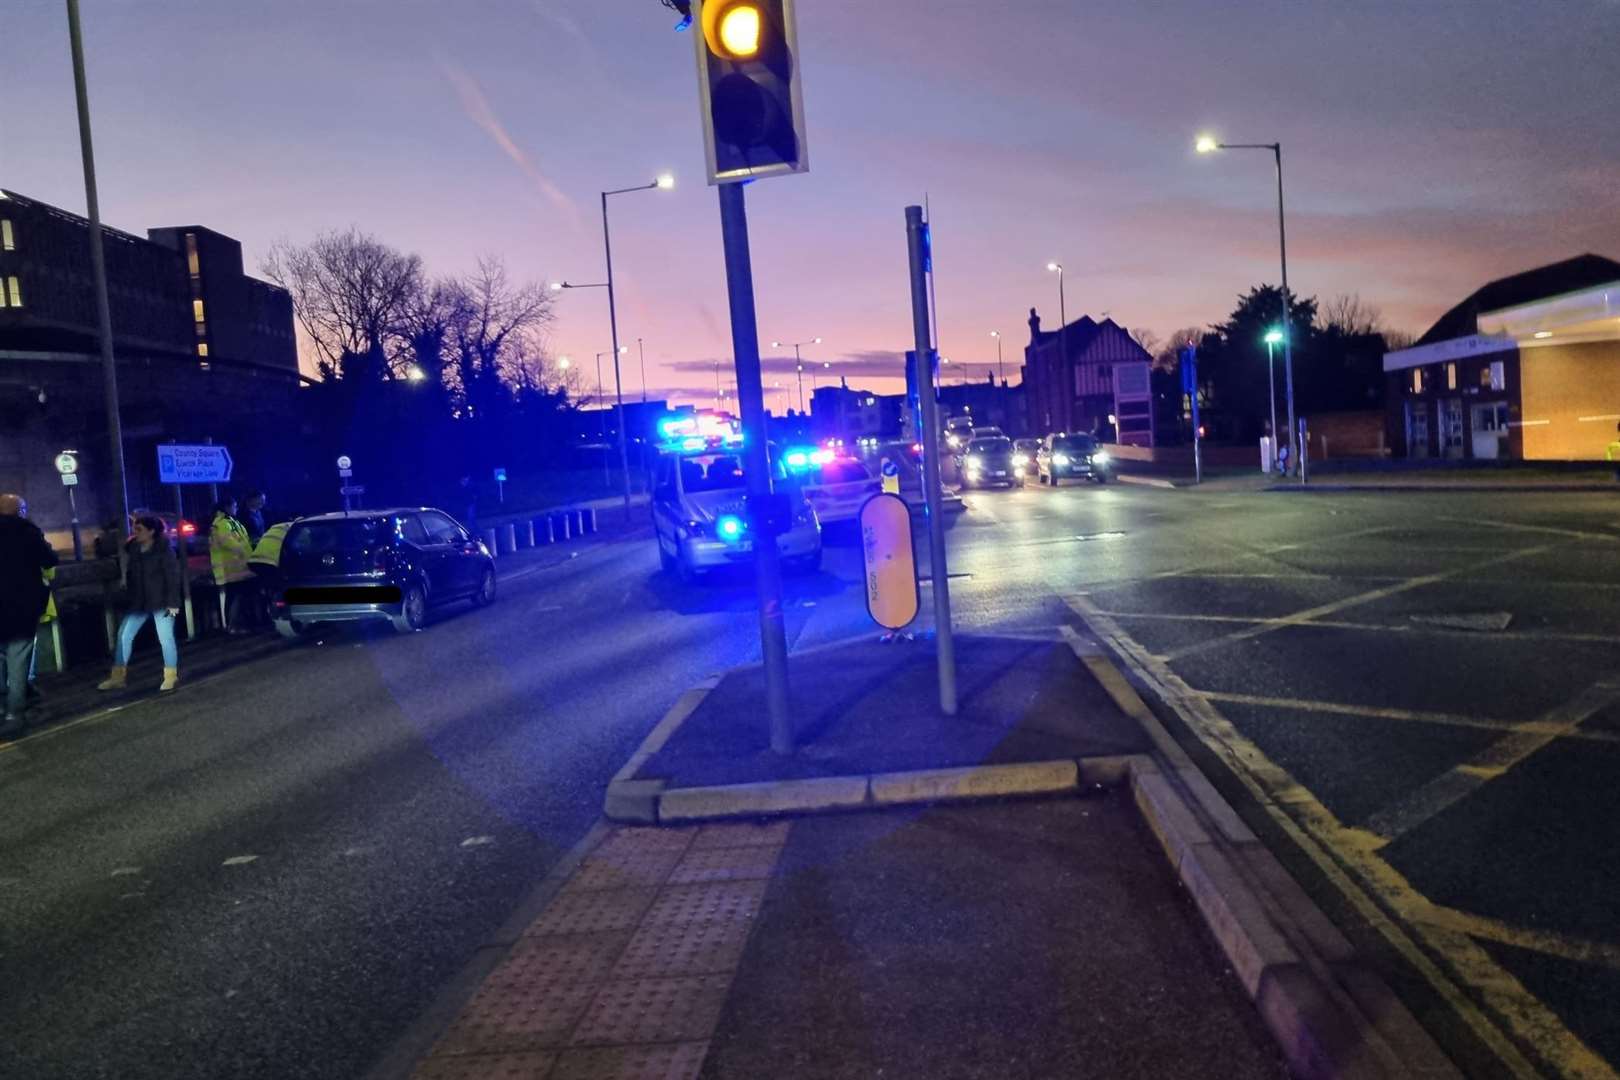 The Somerset Road/Canterbury Road junction was partially blocked following the incident